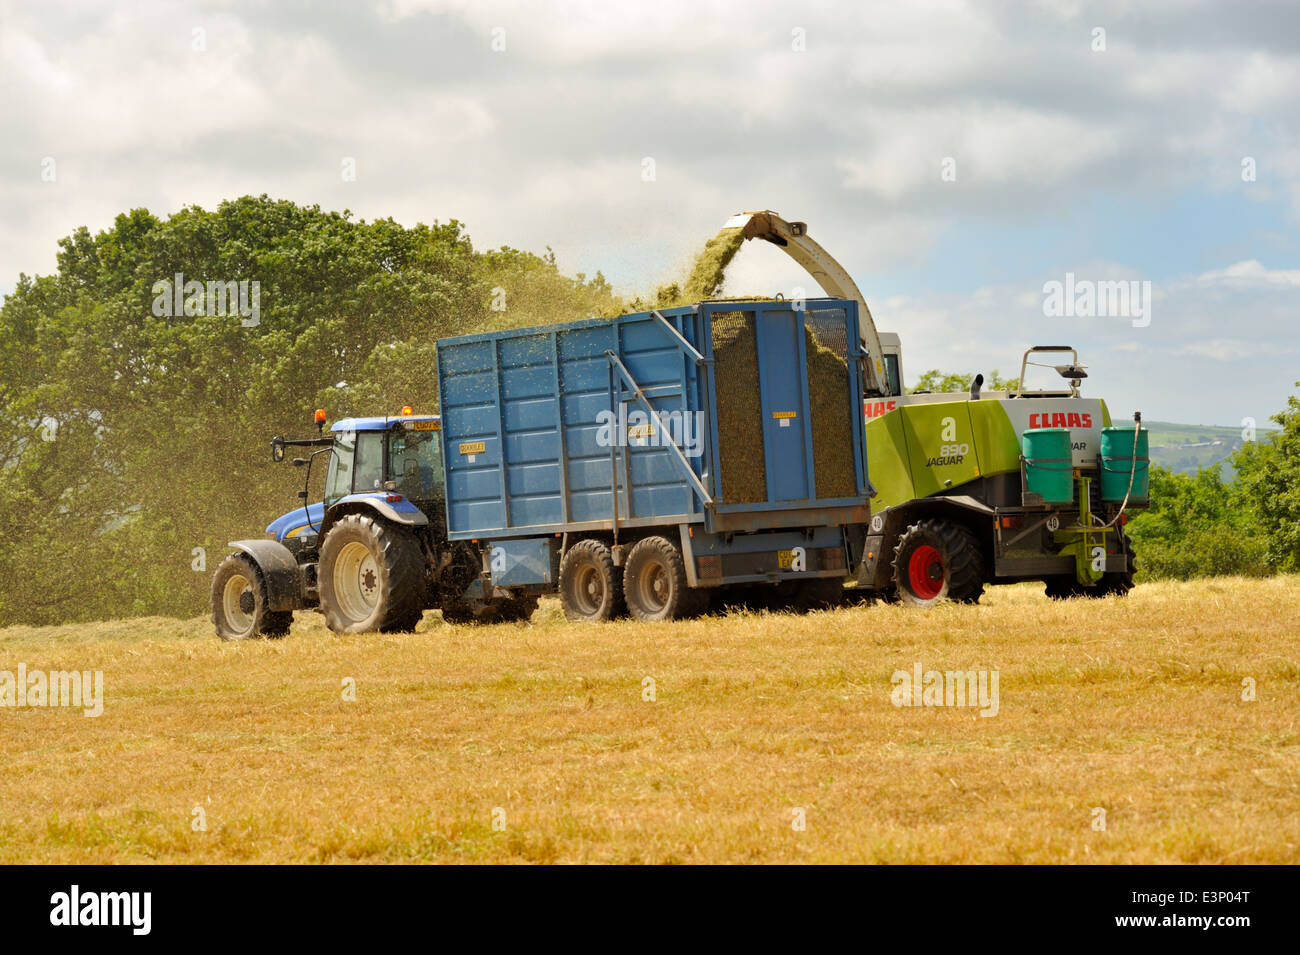 Tractor pulled trailer being filled by cut grass for silage making by forage harvester Stock Photo